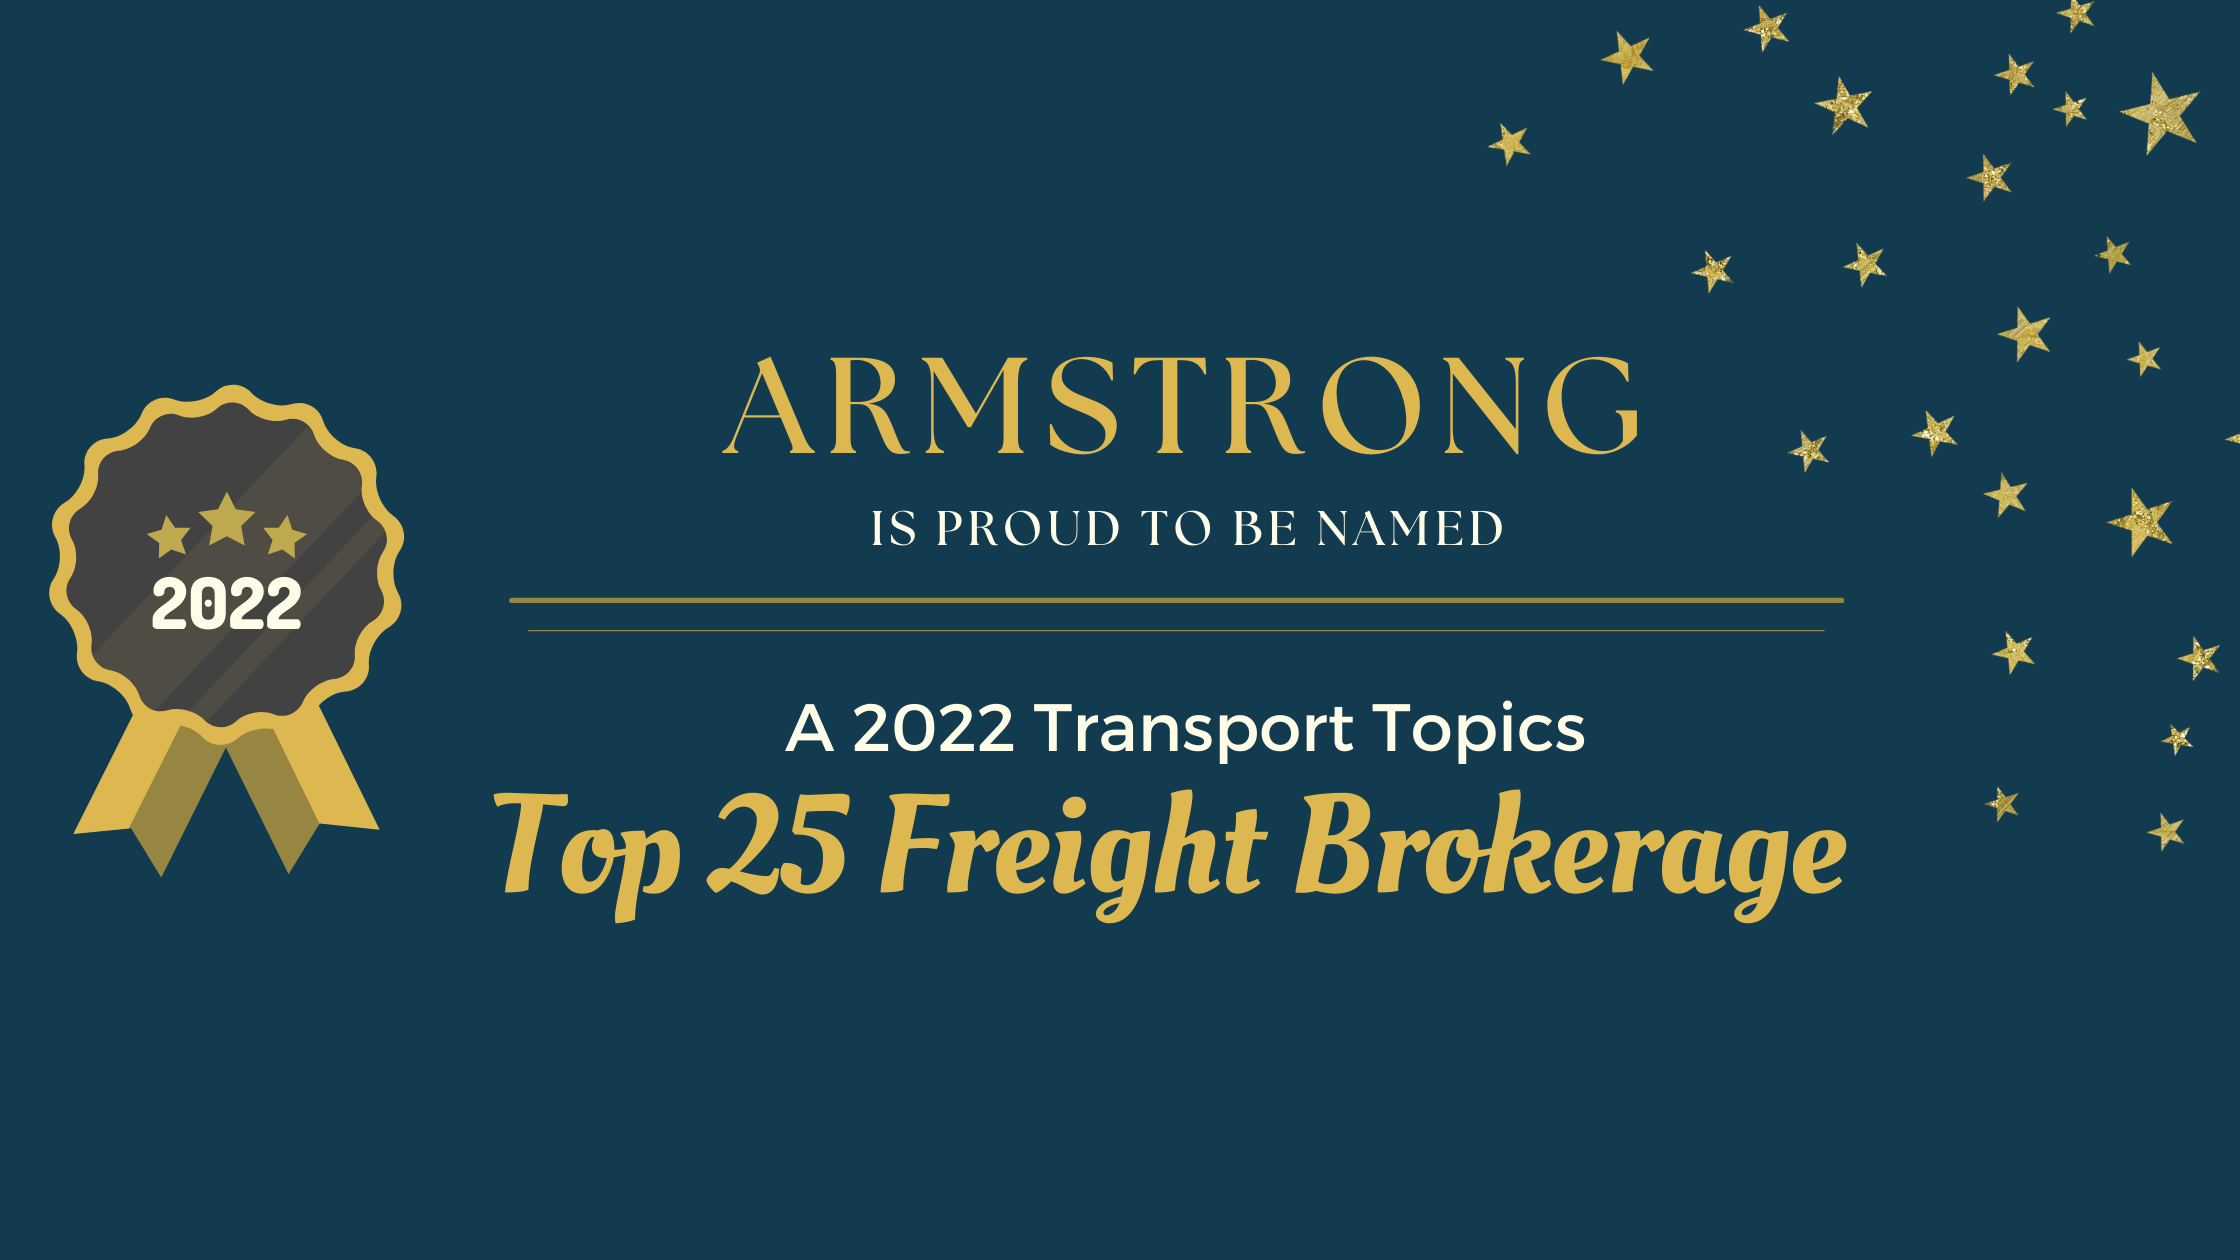 Armstrong Transport Group Named a Top 25 Freight Brokerage by Transport Topics